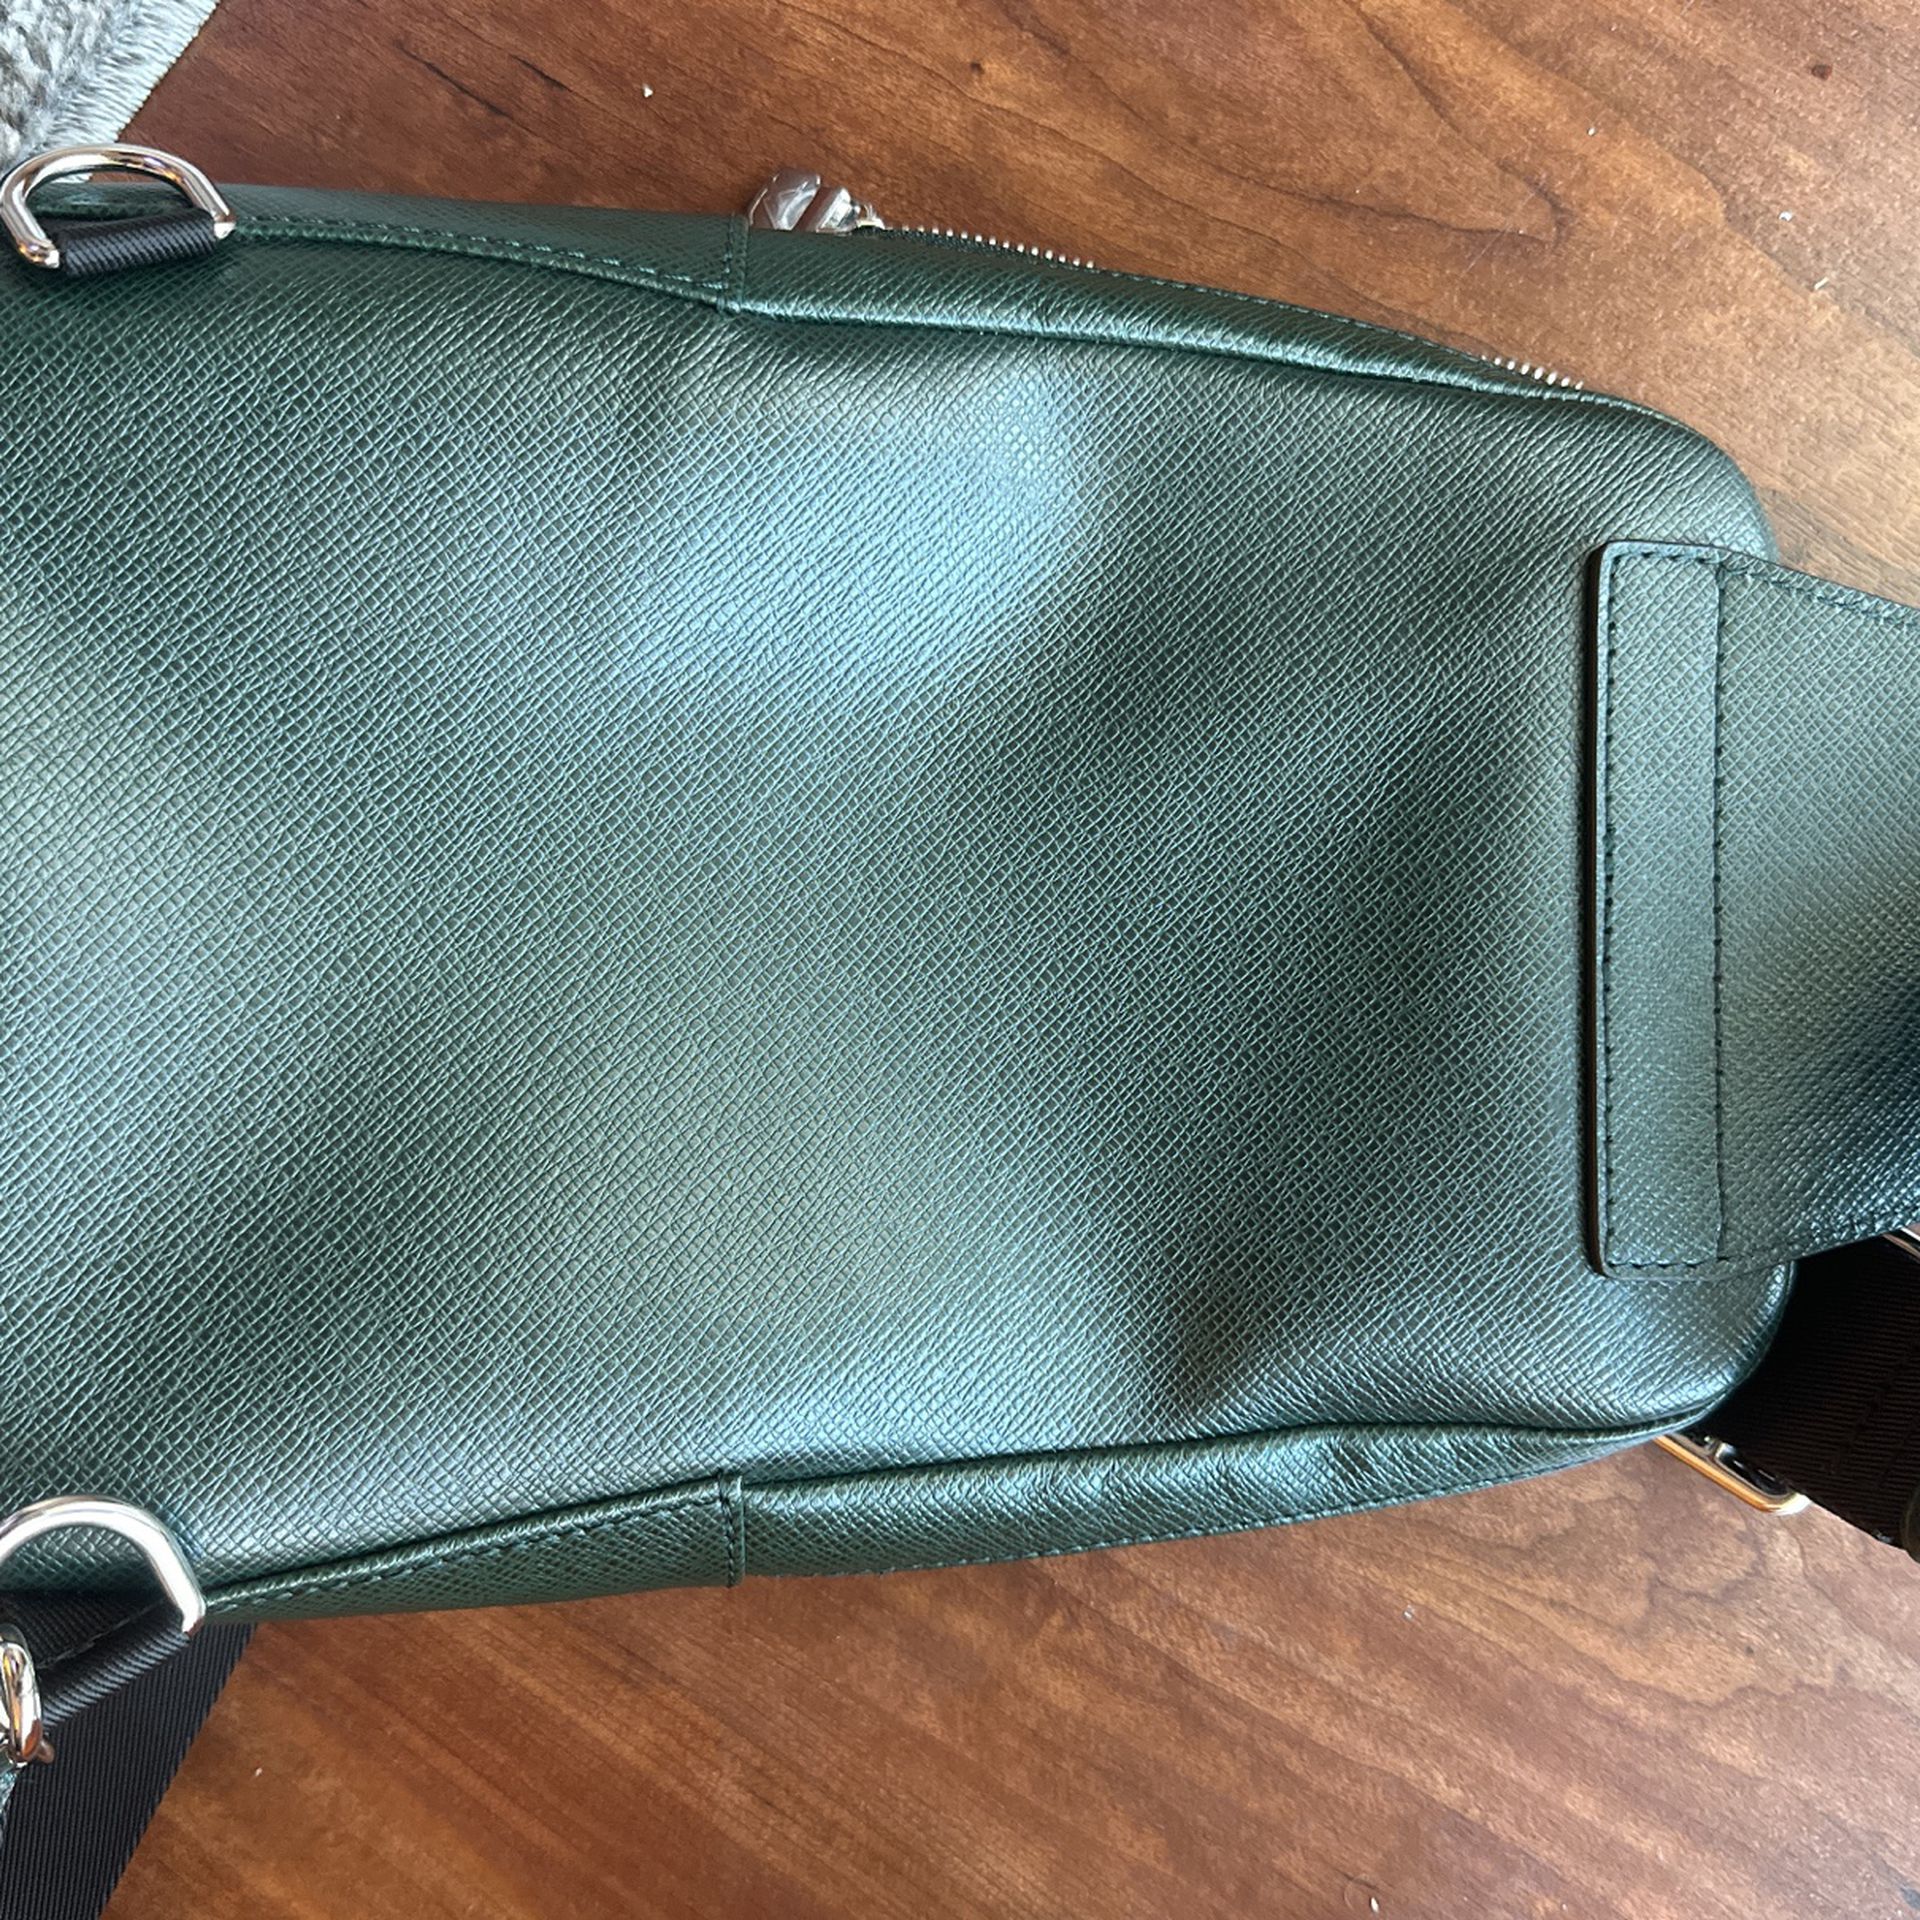 Louis vuitton avenue slingbag for Sale in Los Angeles, CA - OfferUp